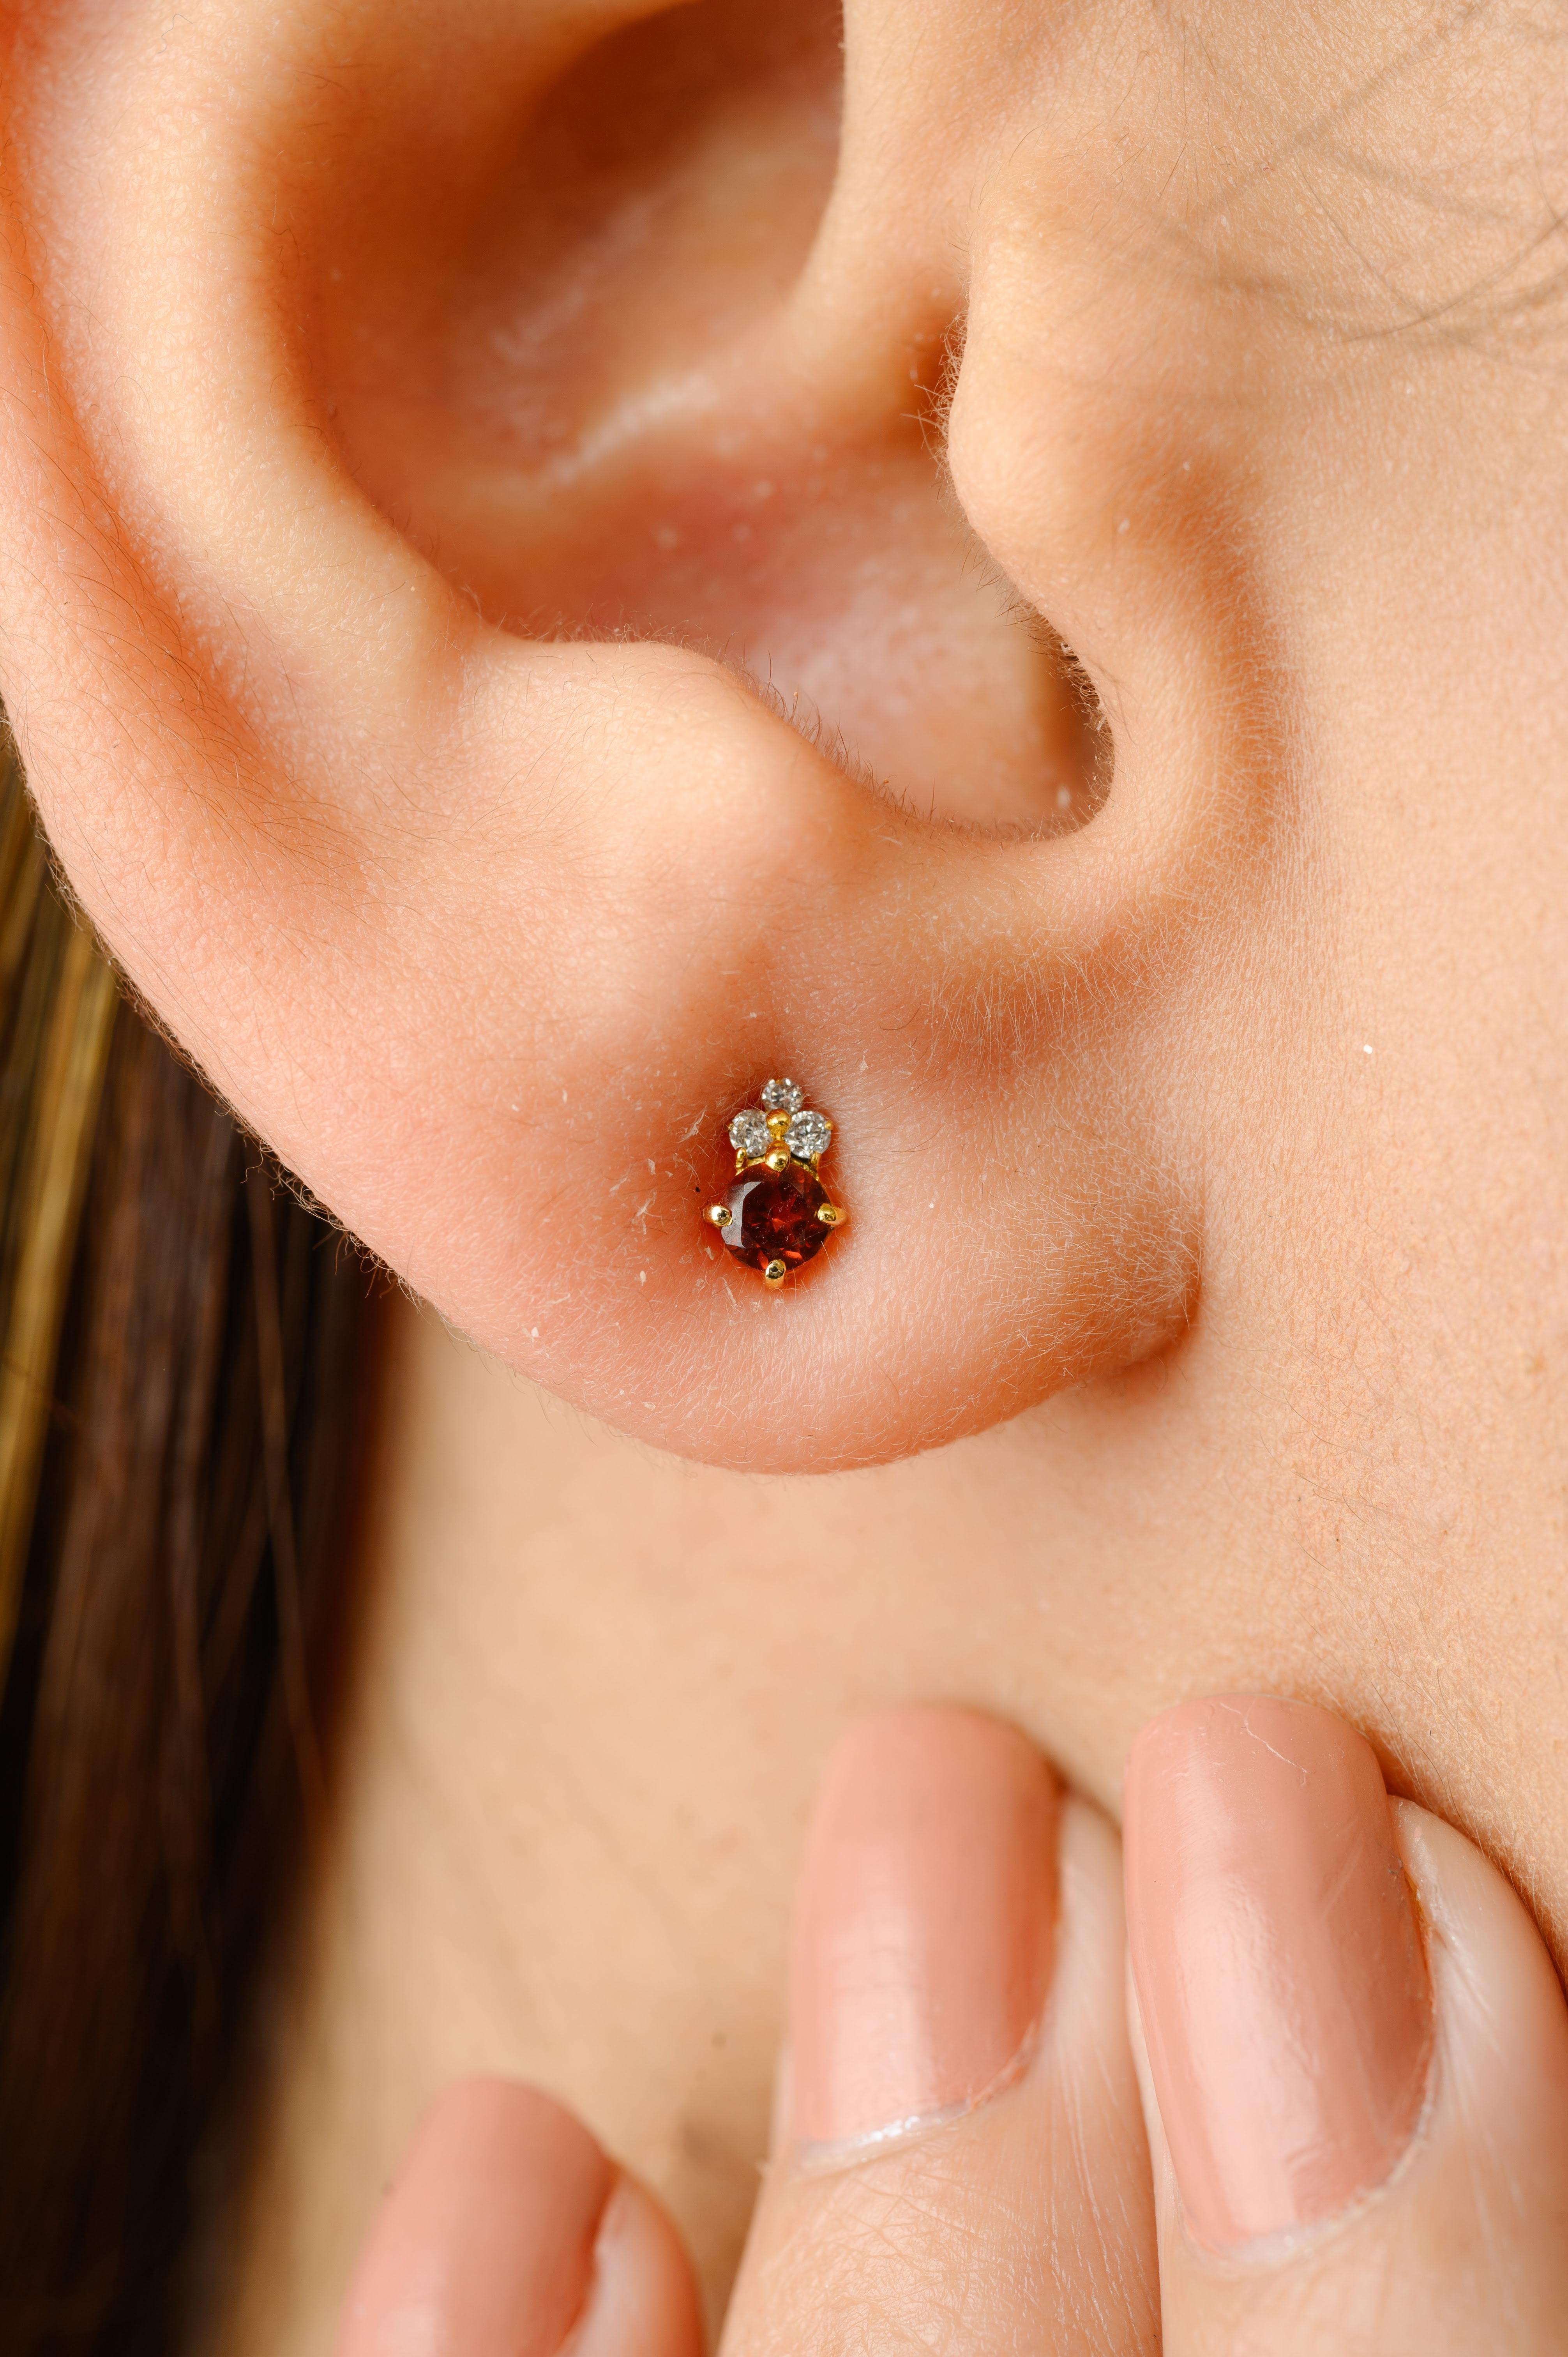 Dainty Garnet and Diamond Pushback Stud Earrings in 14K Gold to make a statement with your look. You shall need stud earrings to make a statement with your look. These earrings create a sparkling, luxurious look featuring round cut garnet.
Garnet